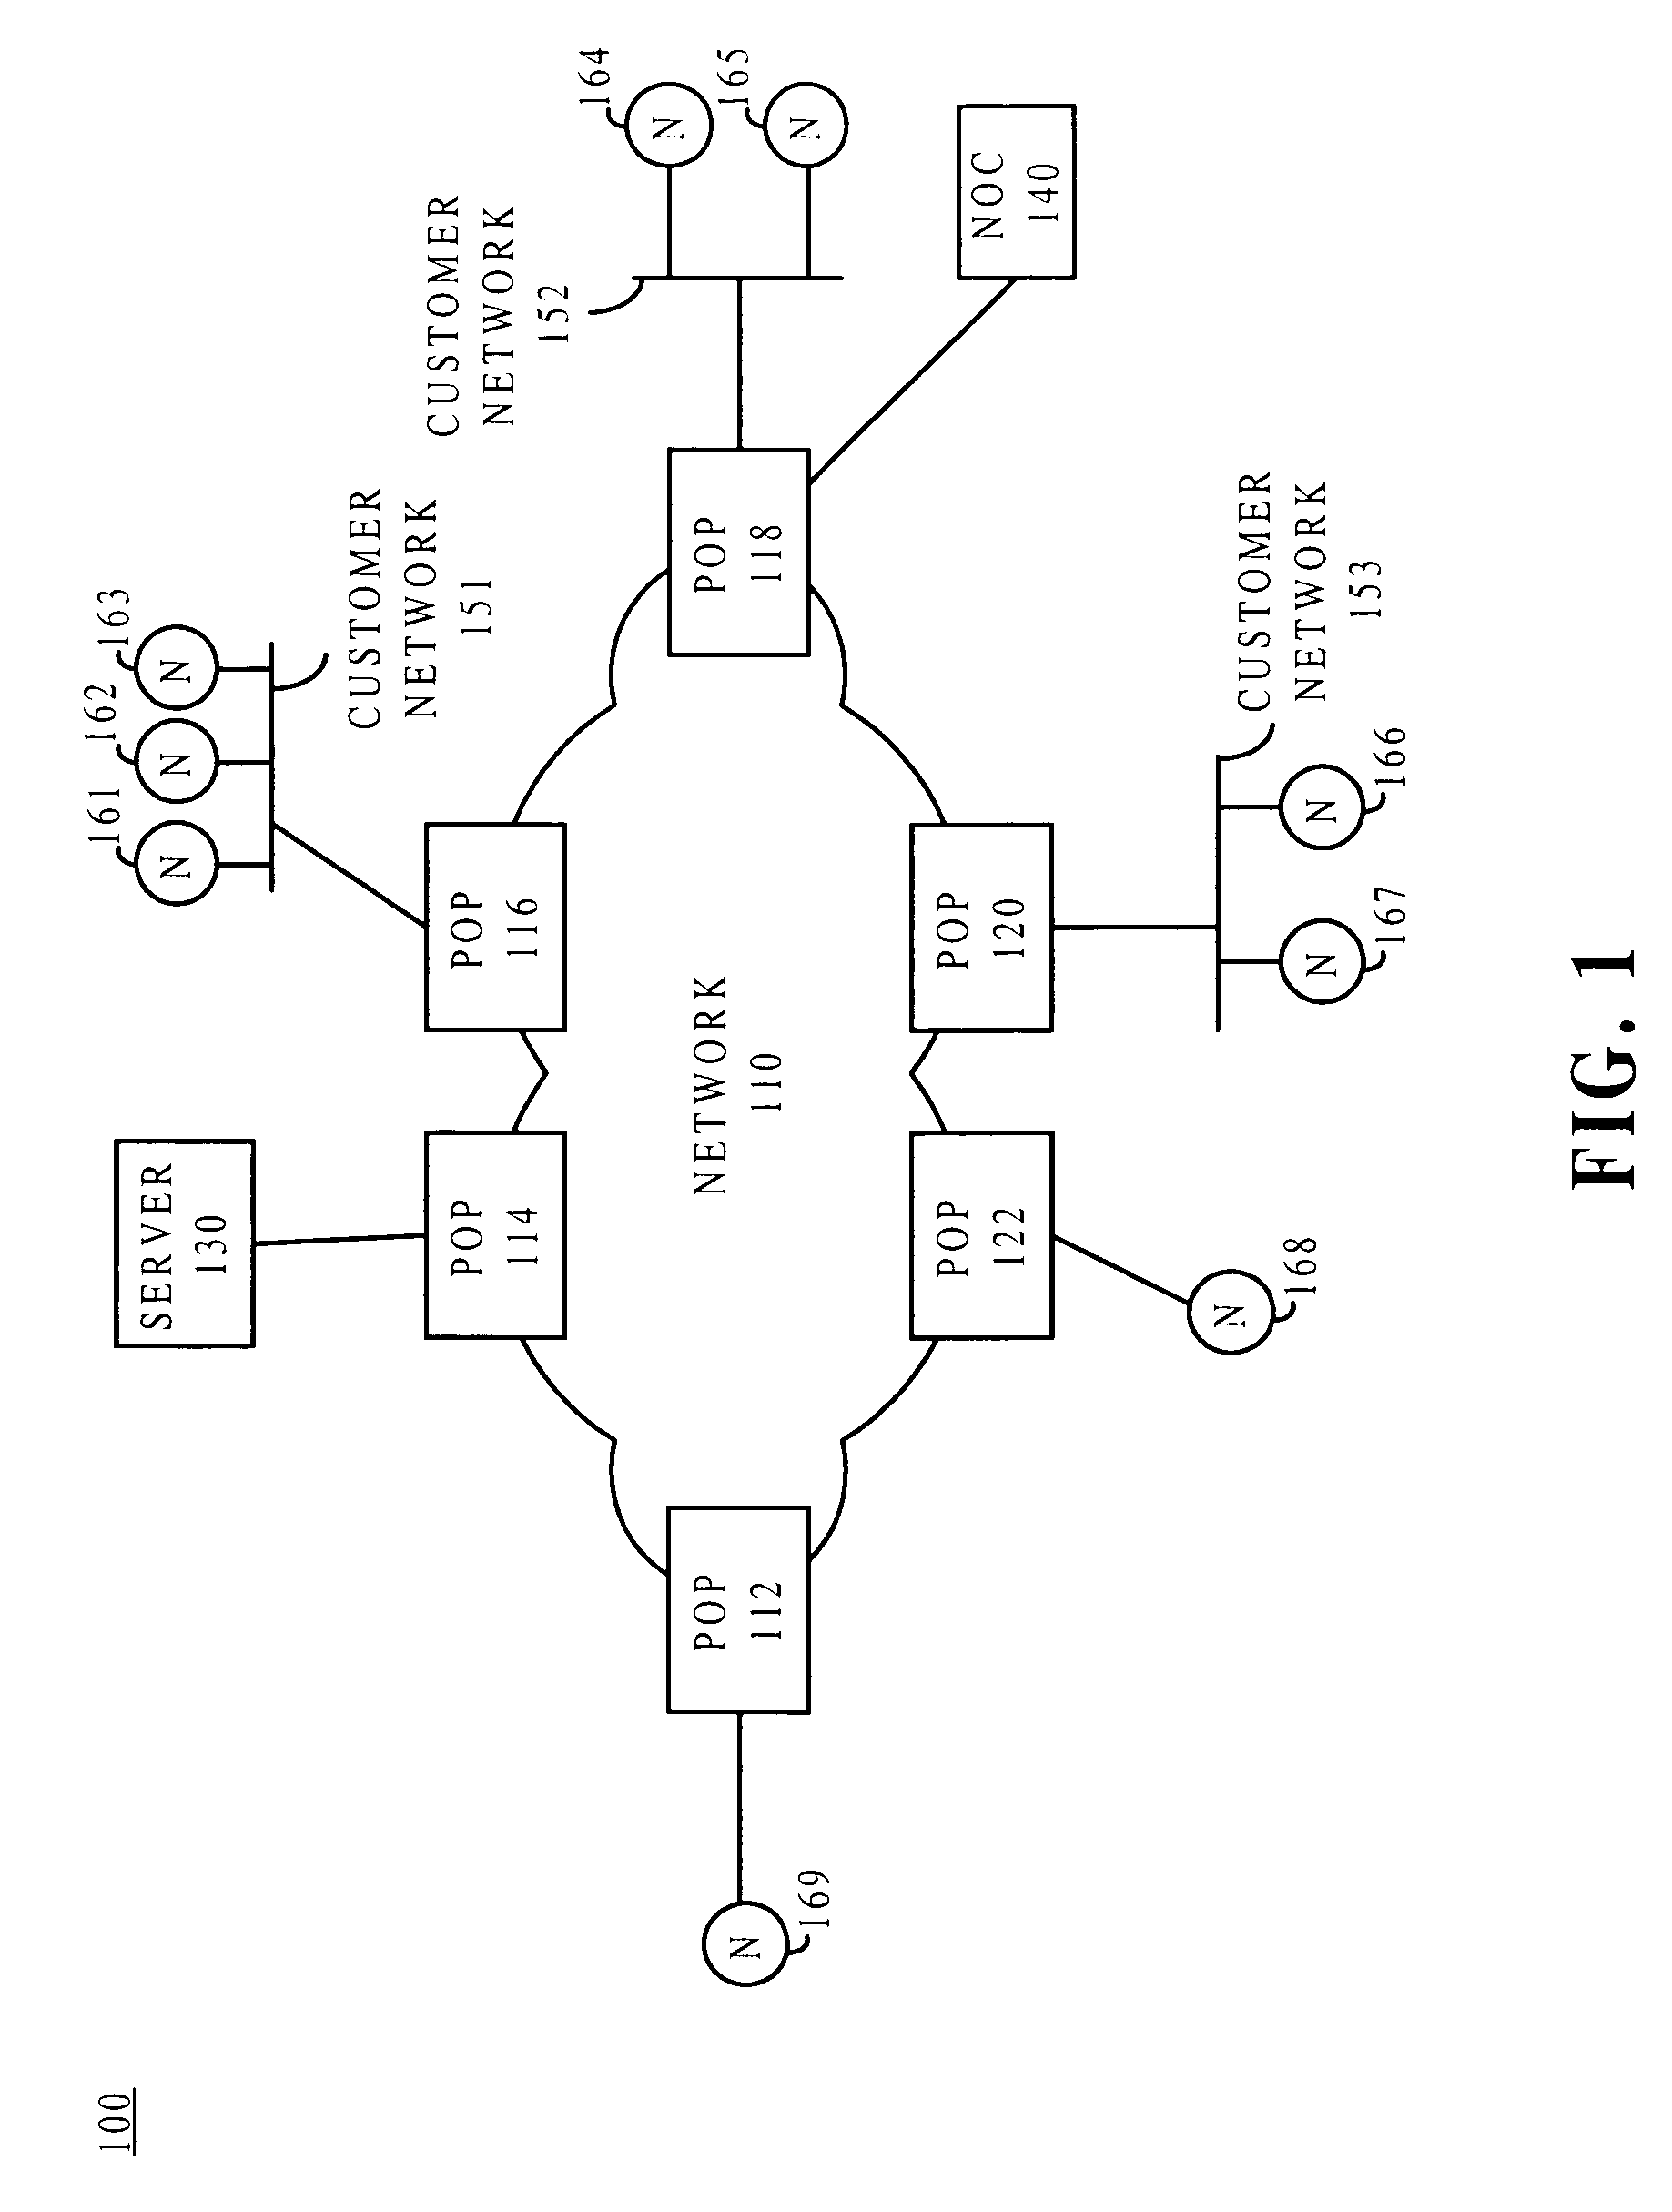 Systems and methods for managing faults in a network